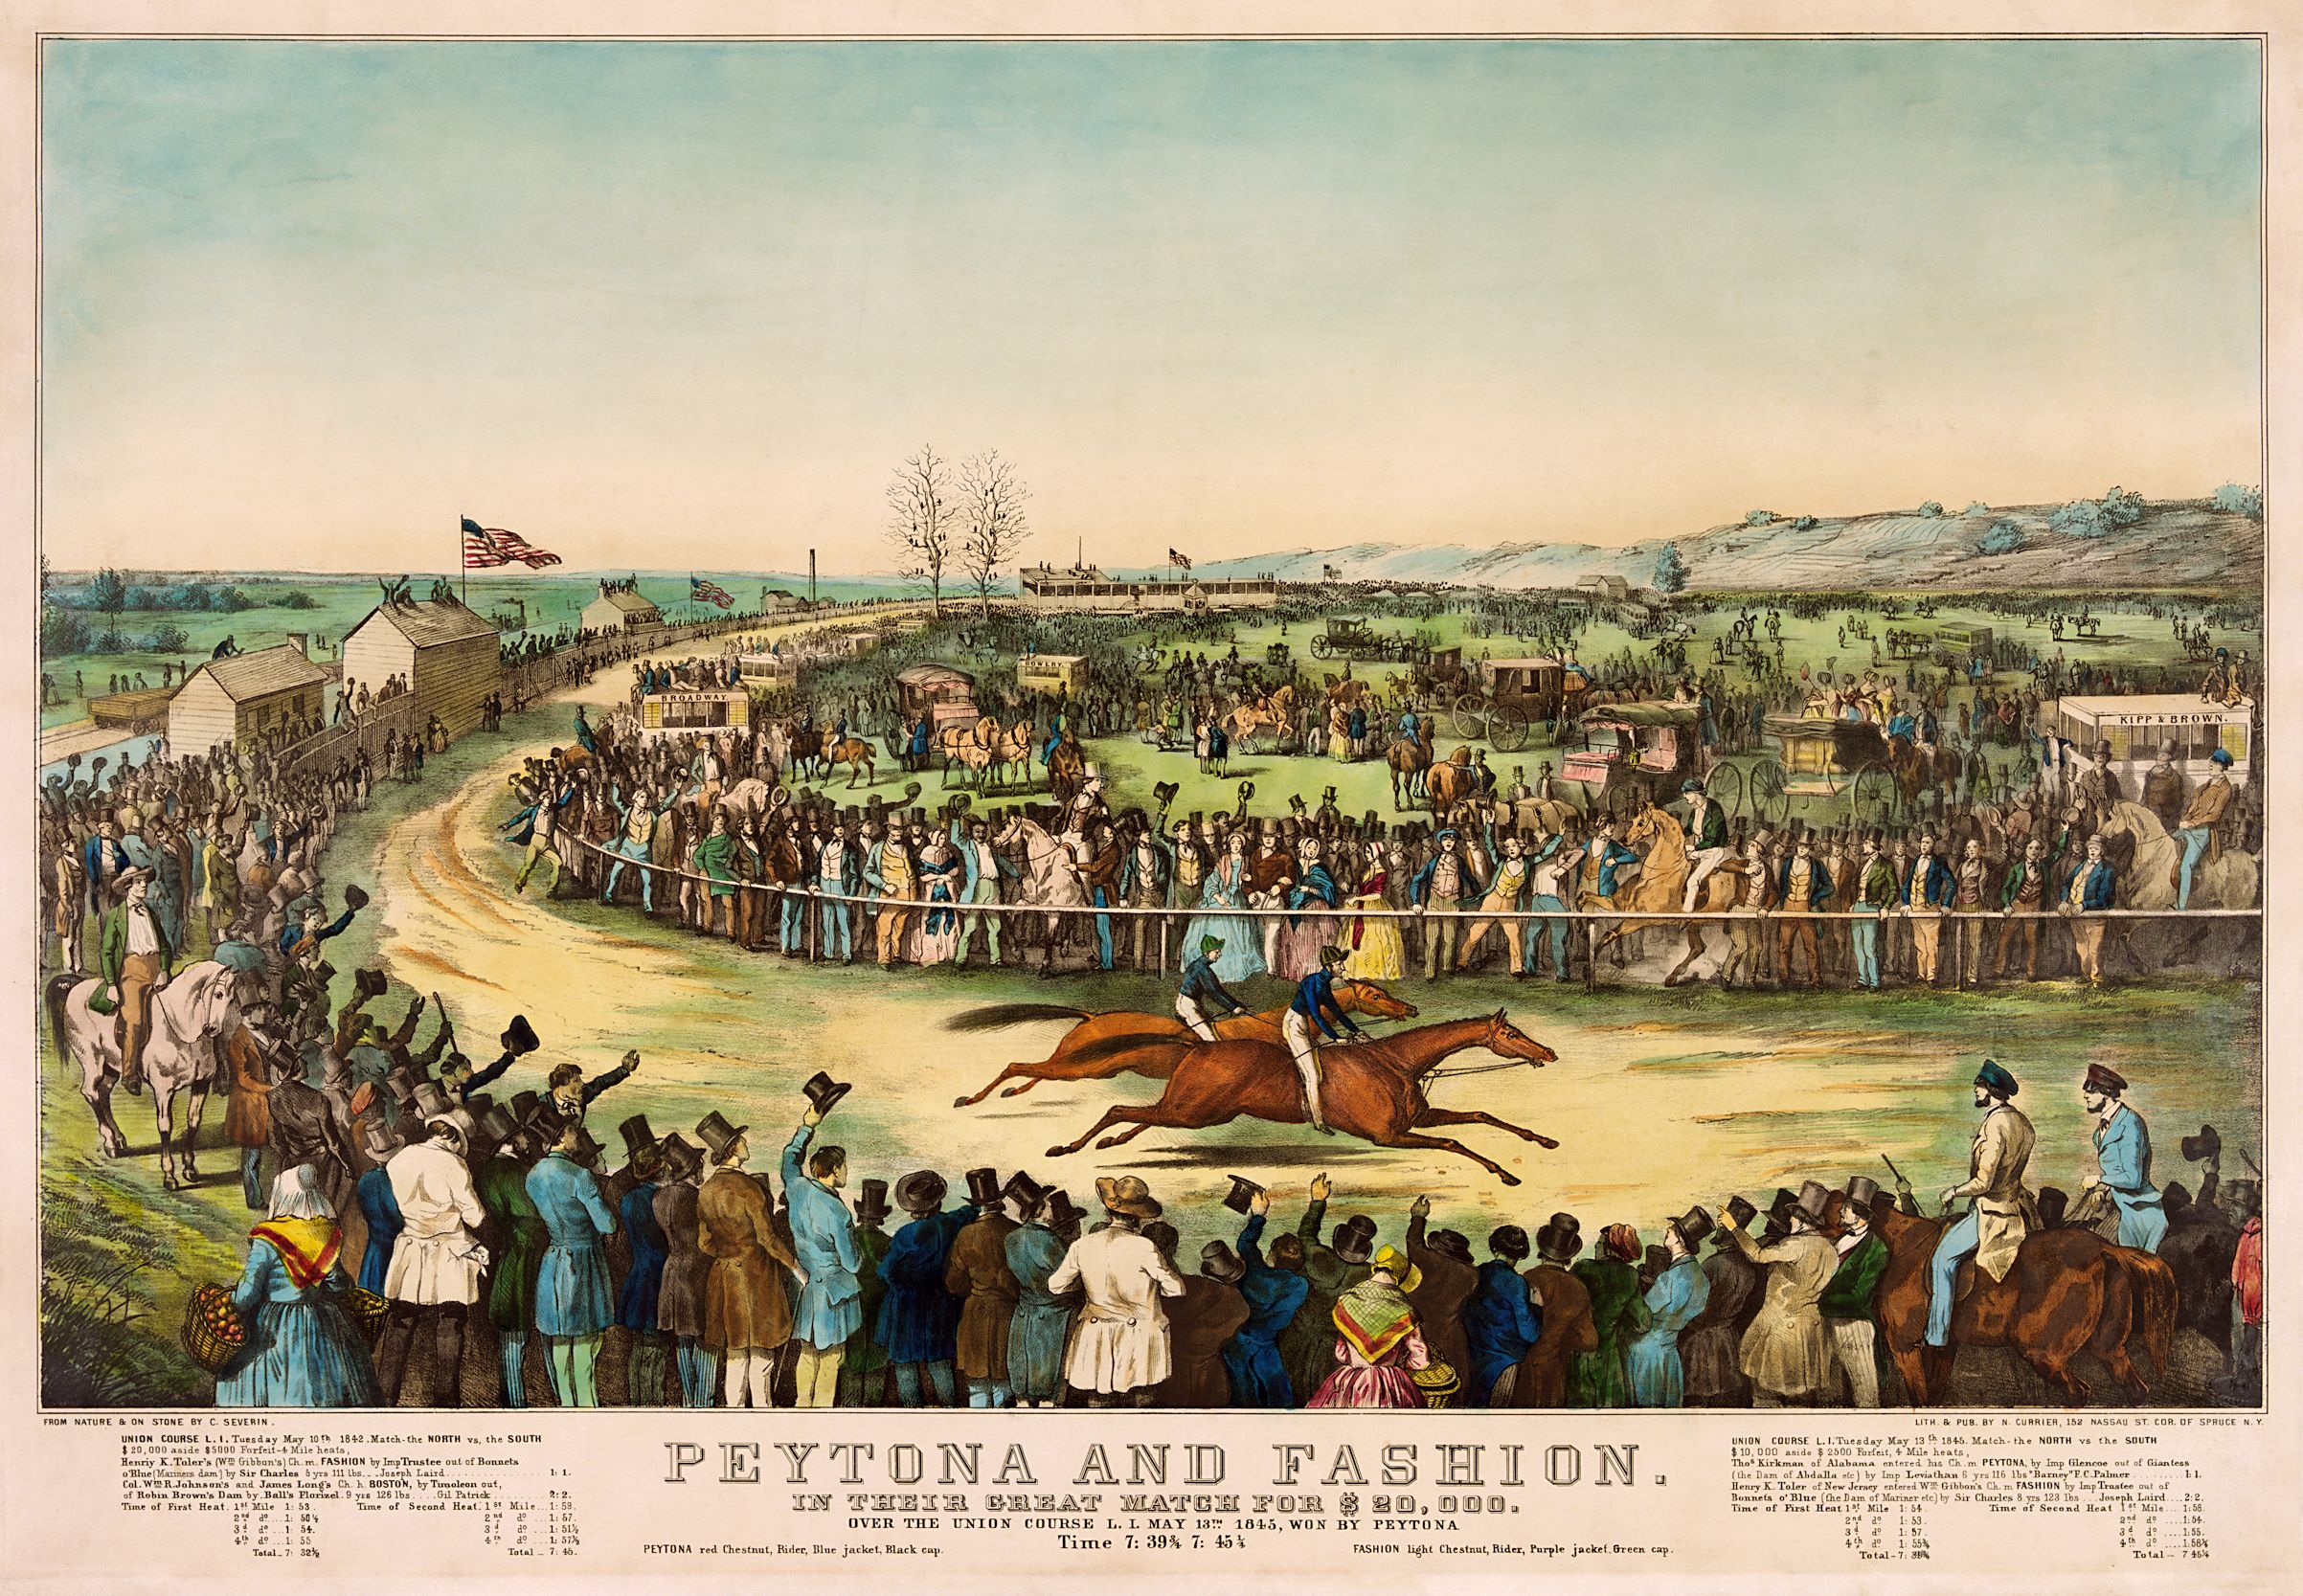 Currier & Ives print depicting the 1845 Great Match between Peytona and Fashion at the Union Course in Long Island, won by Peytona, by artist C. Severin (Museum Collection)